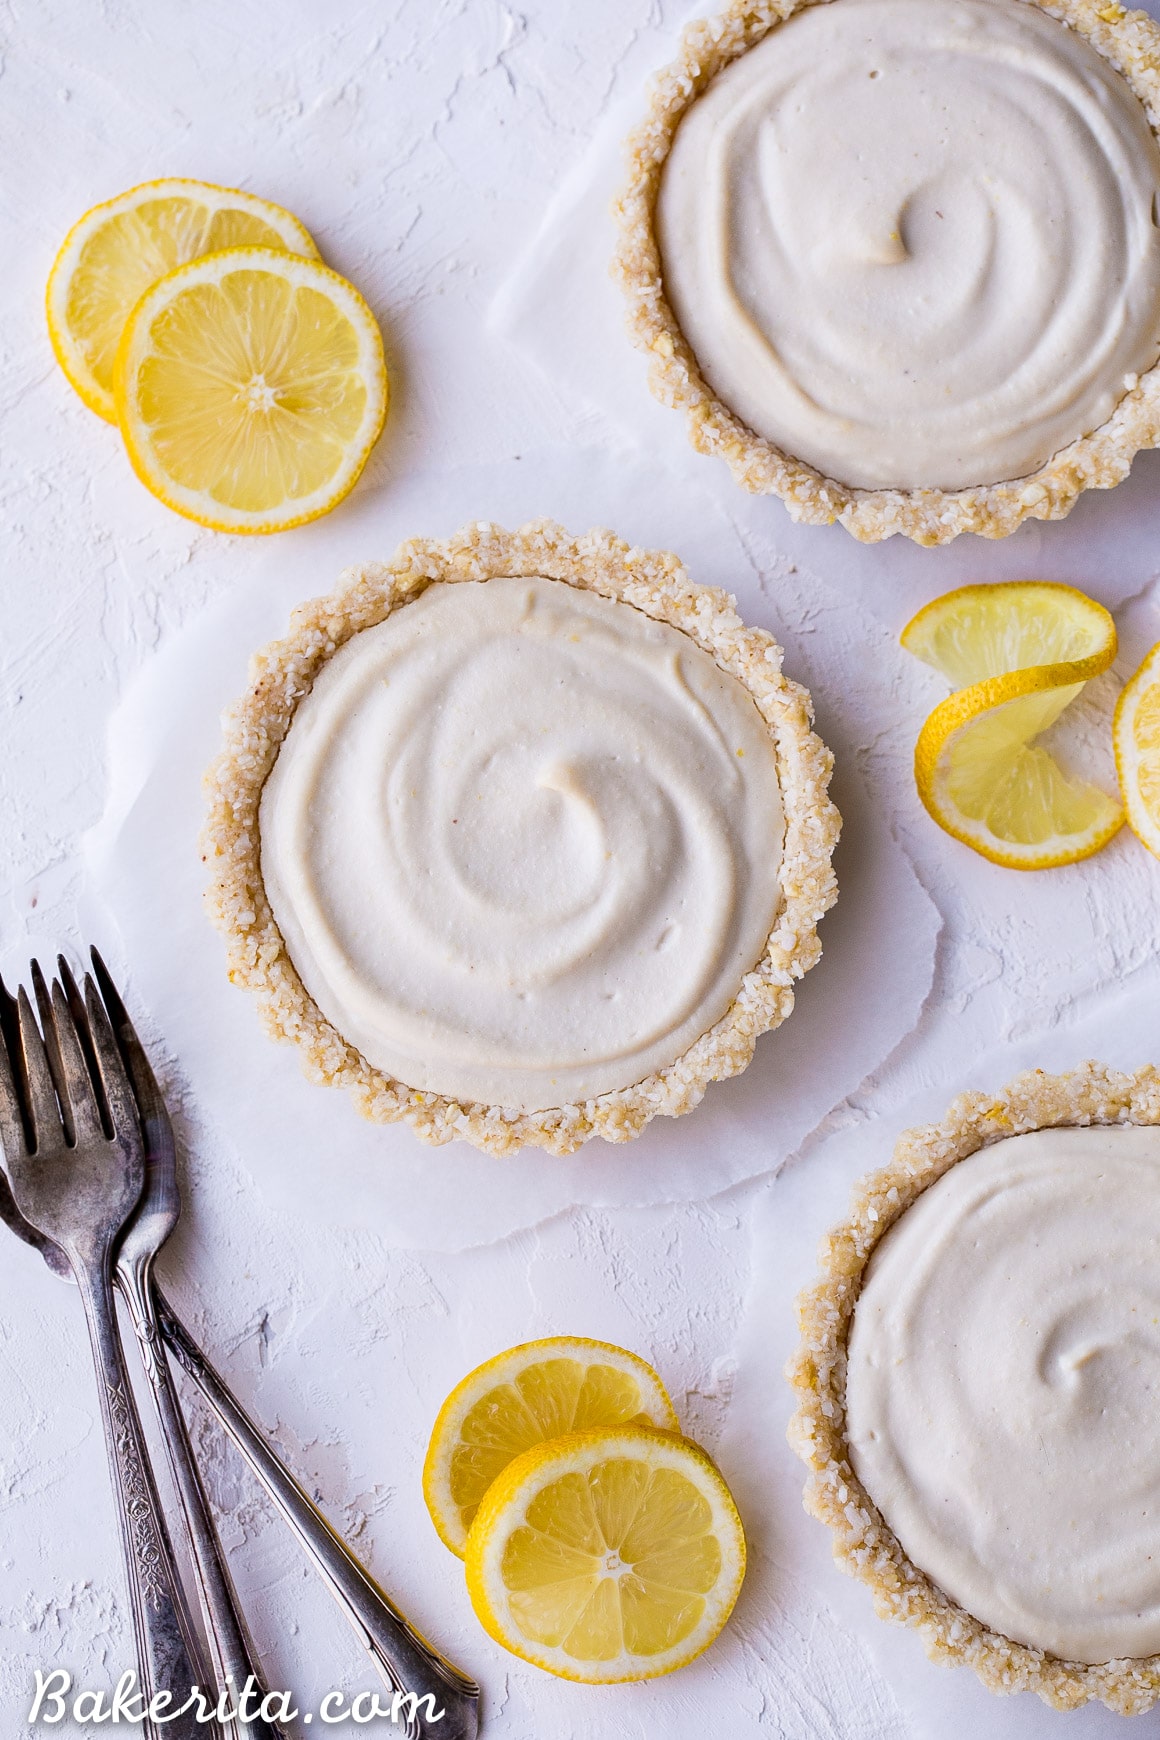 These No-Bake Lemon Tarts are easy to make with tart lemon flavor. The super creamy and bright lemon filling is perfectly complimented by the lemony cashew coconut crust. These gluten-free, Paleo and vegan tarts are perfect for warm days!